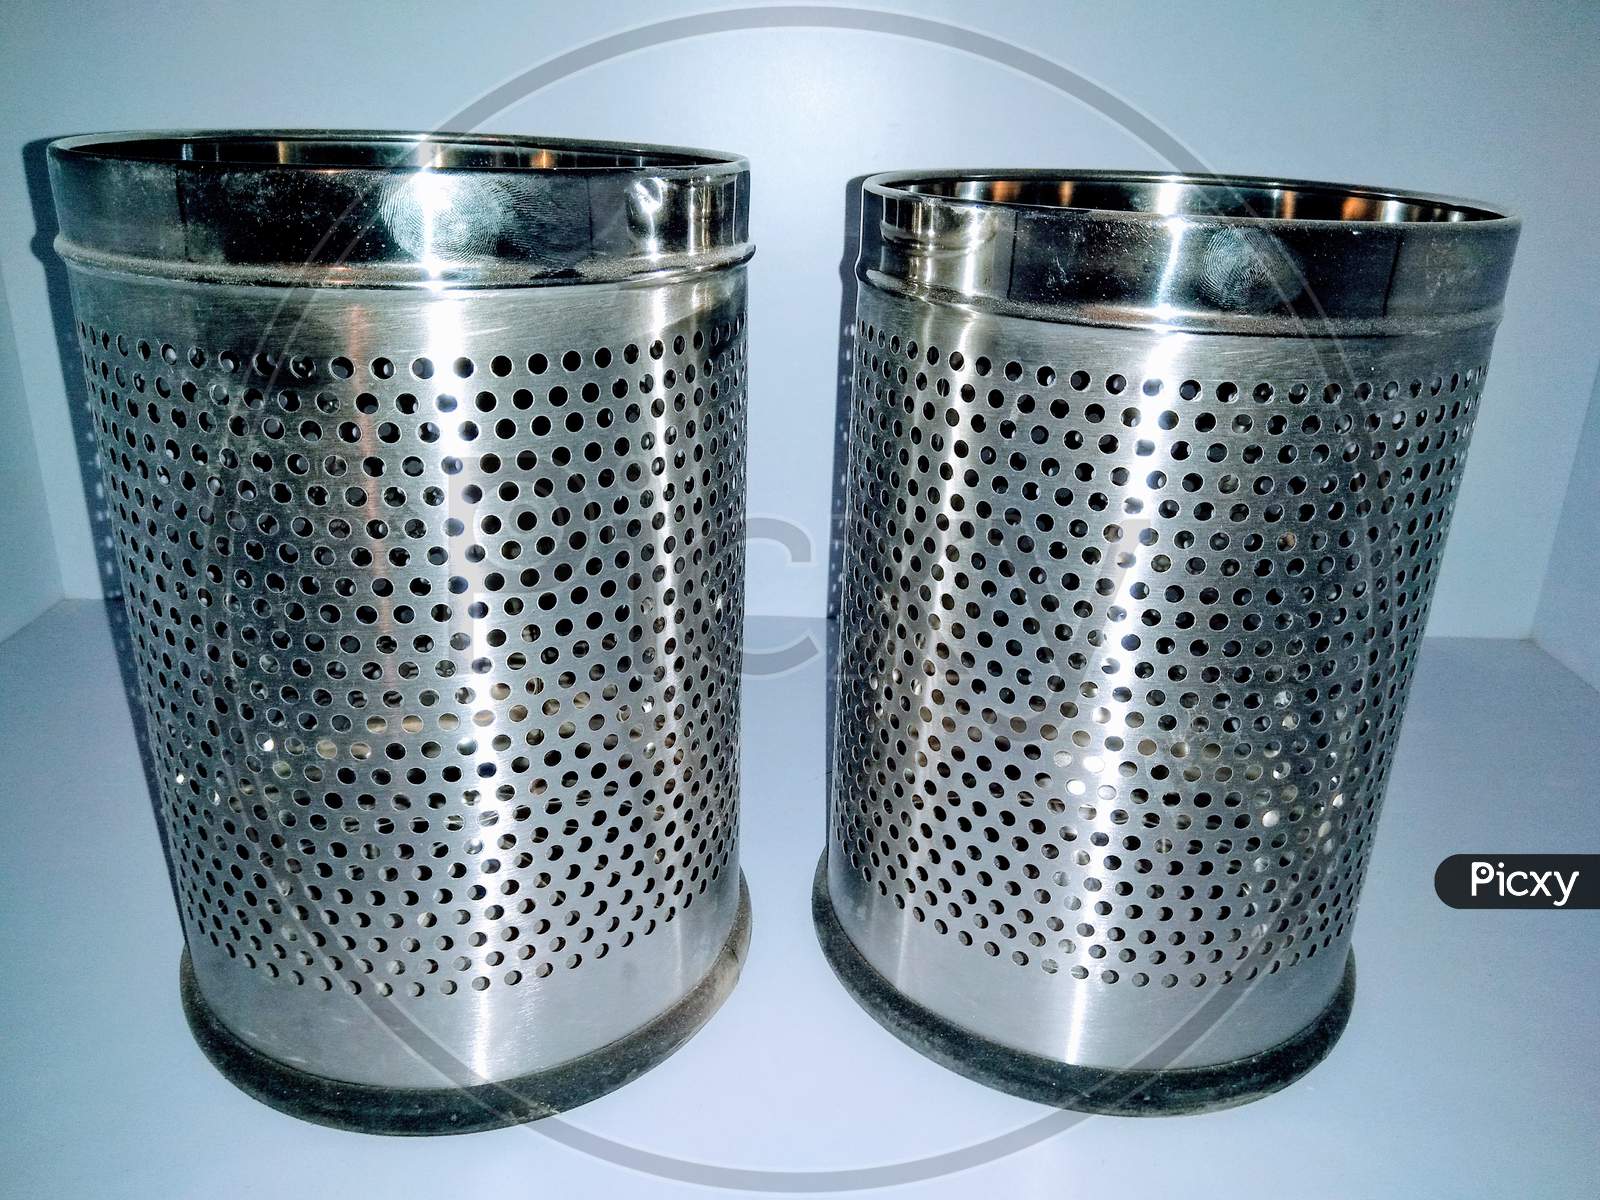 Dustbins  On a White Background